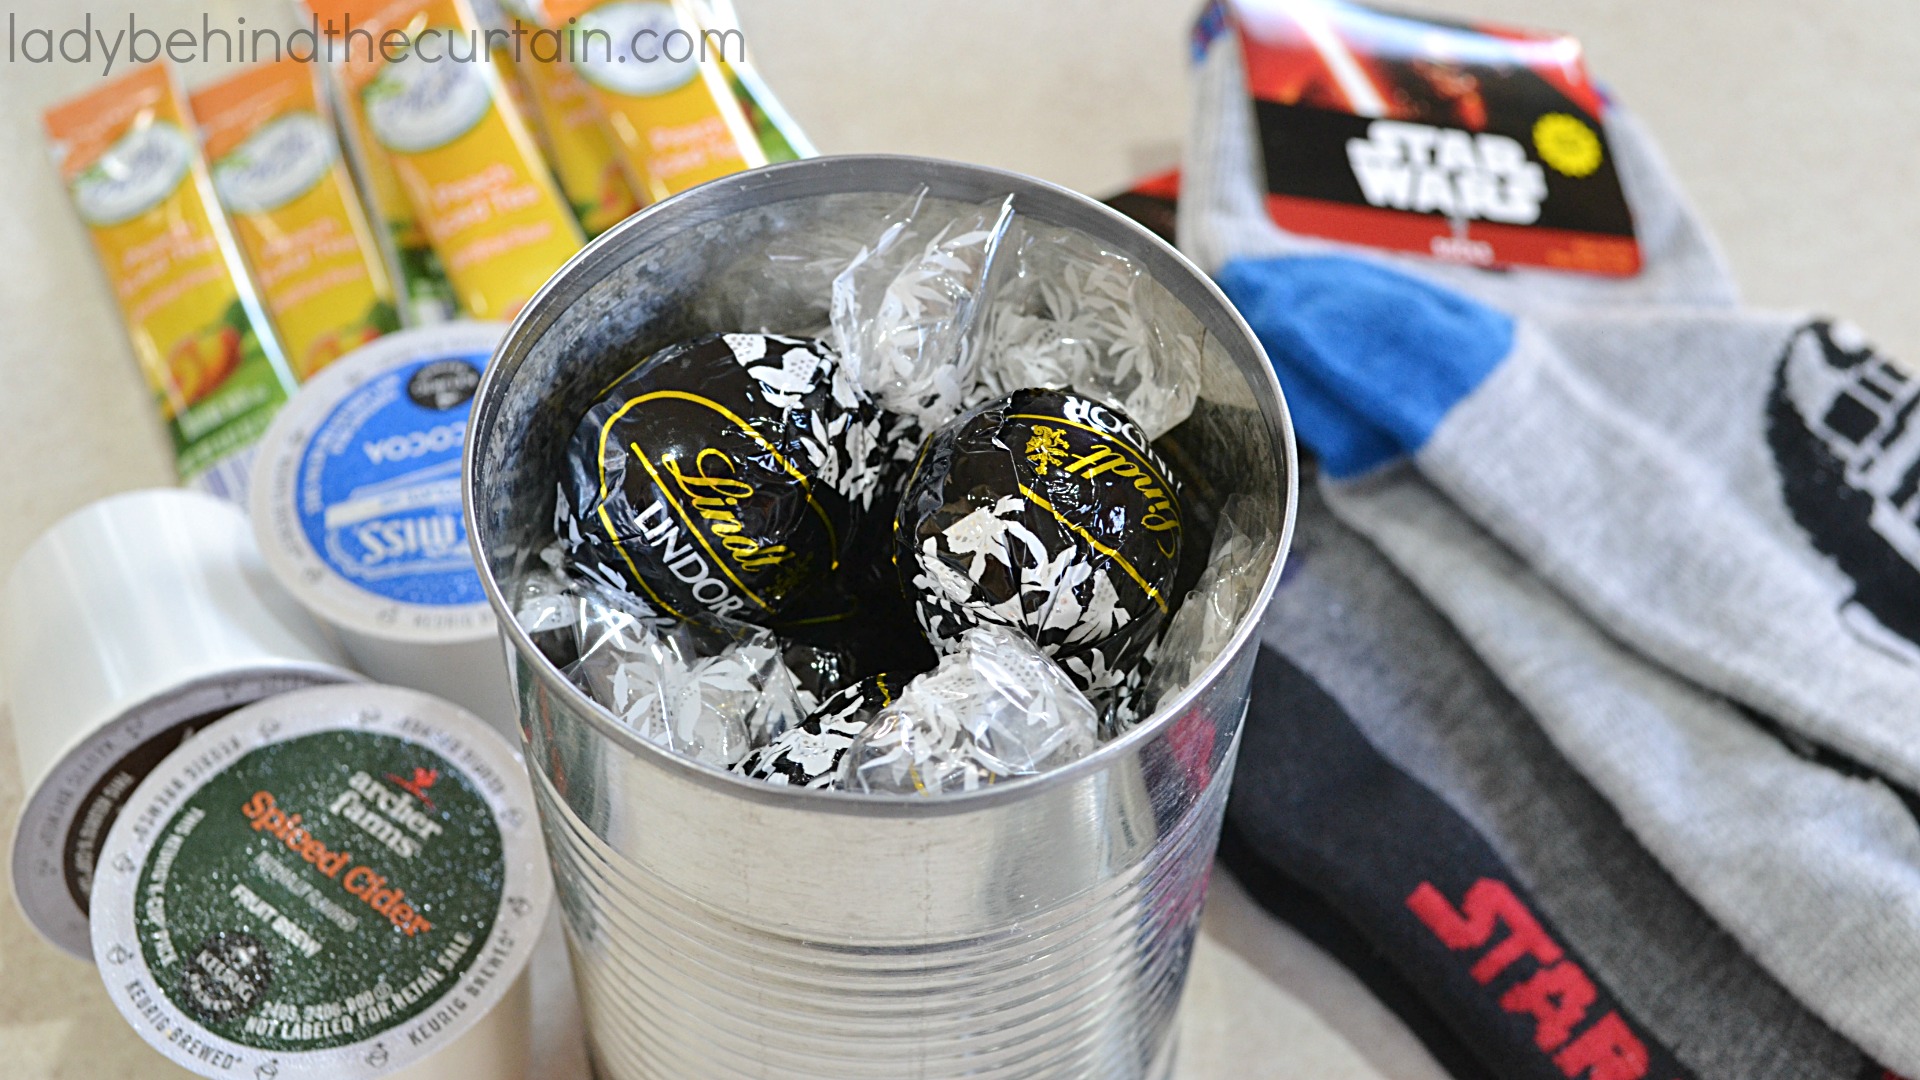 Secret Santa Gift In a Can | Sometimes the best part about a gift is how it's packaged!